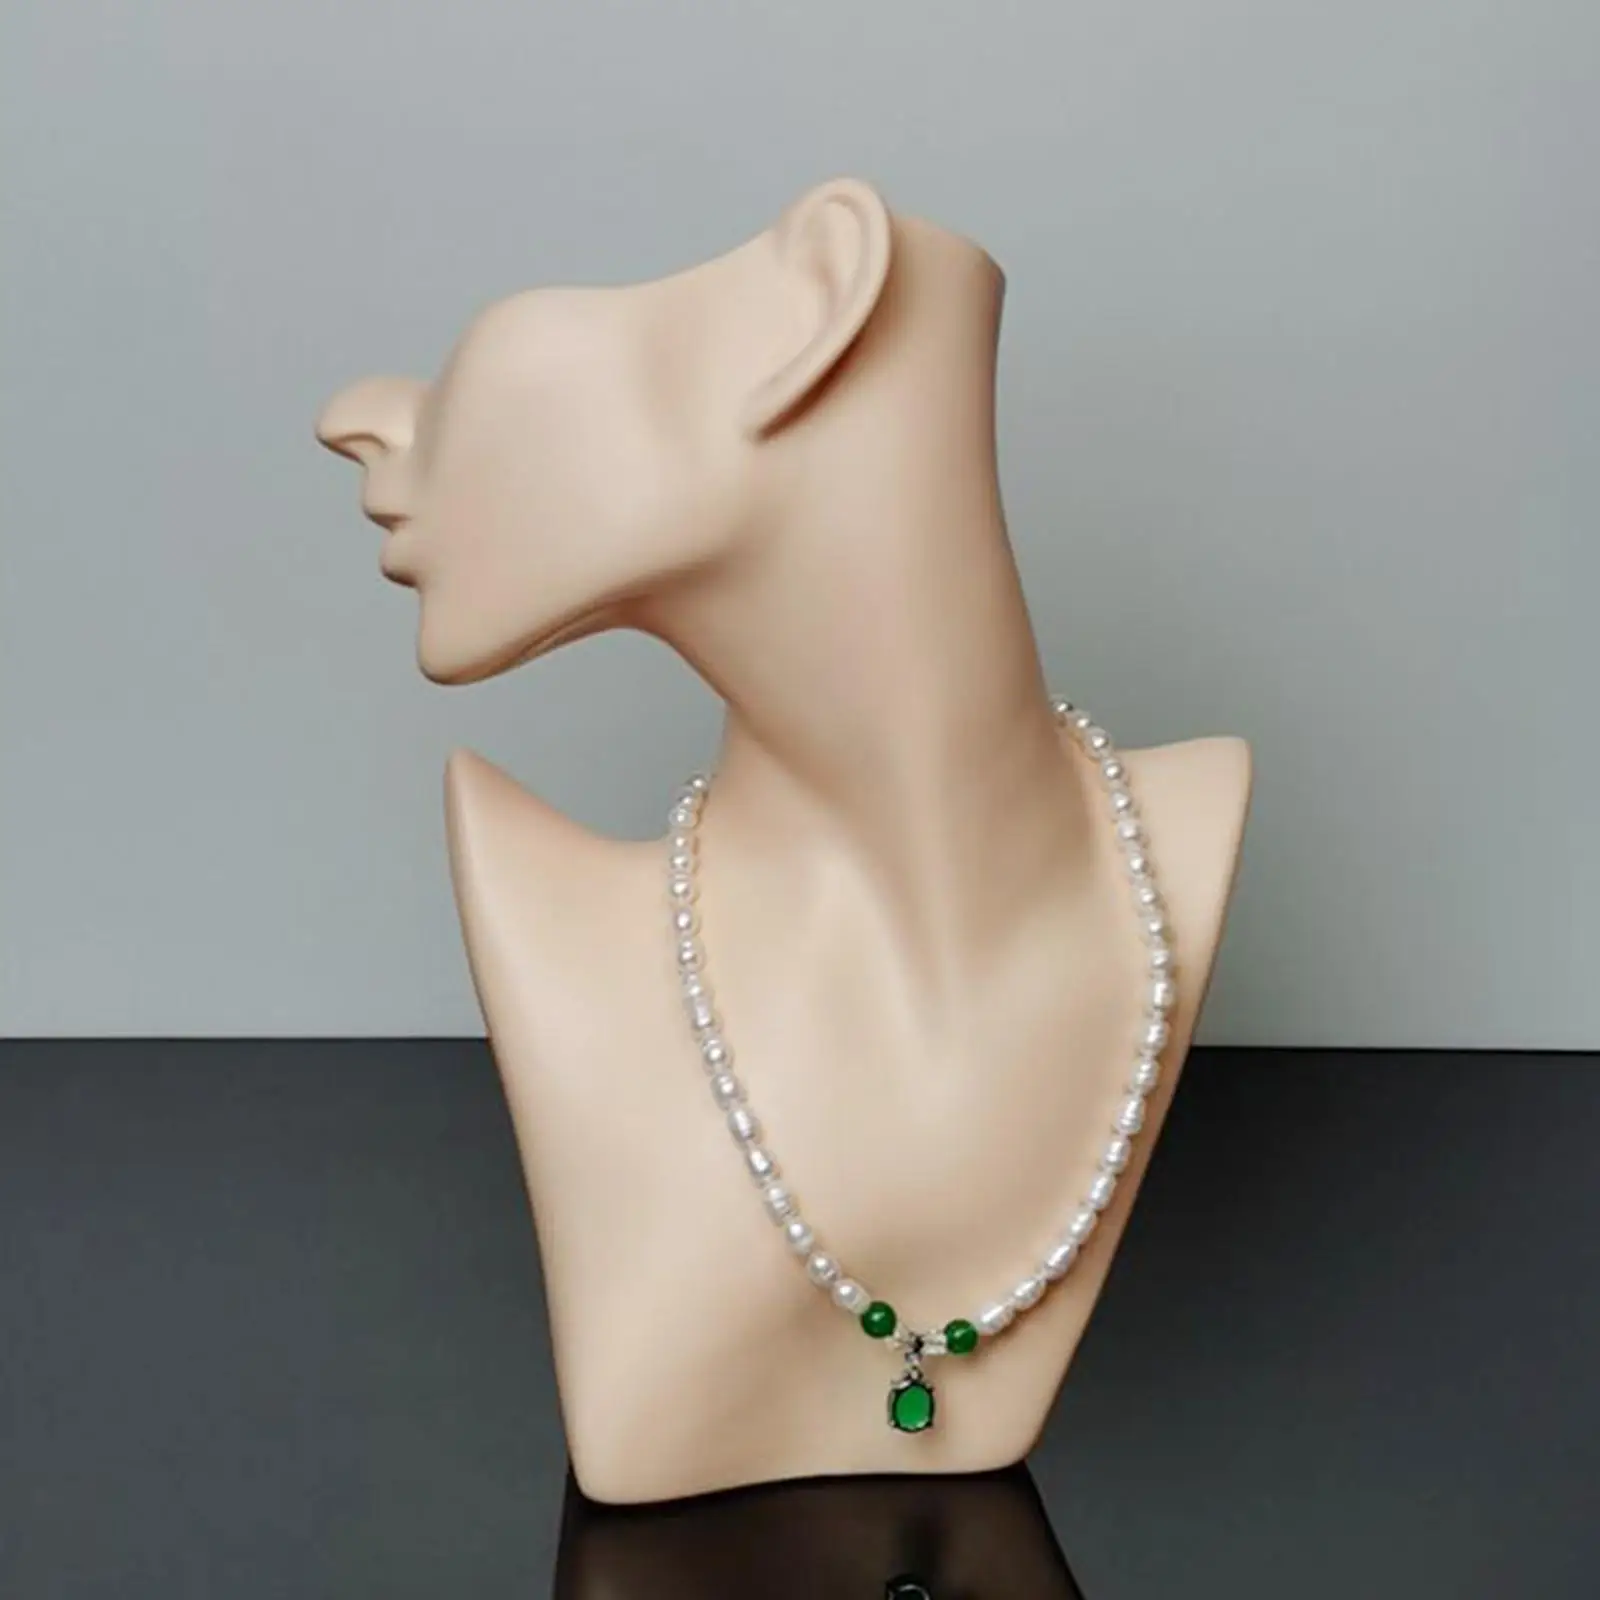 Necklace & Earring Display Female Model Head Earring Display Stands Jewelry Mannequin Display for Bracelets Chain Pendant